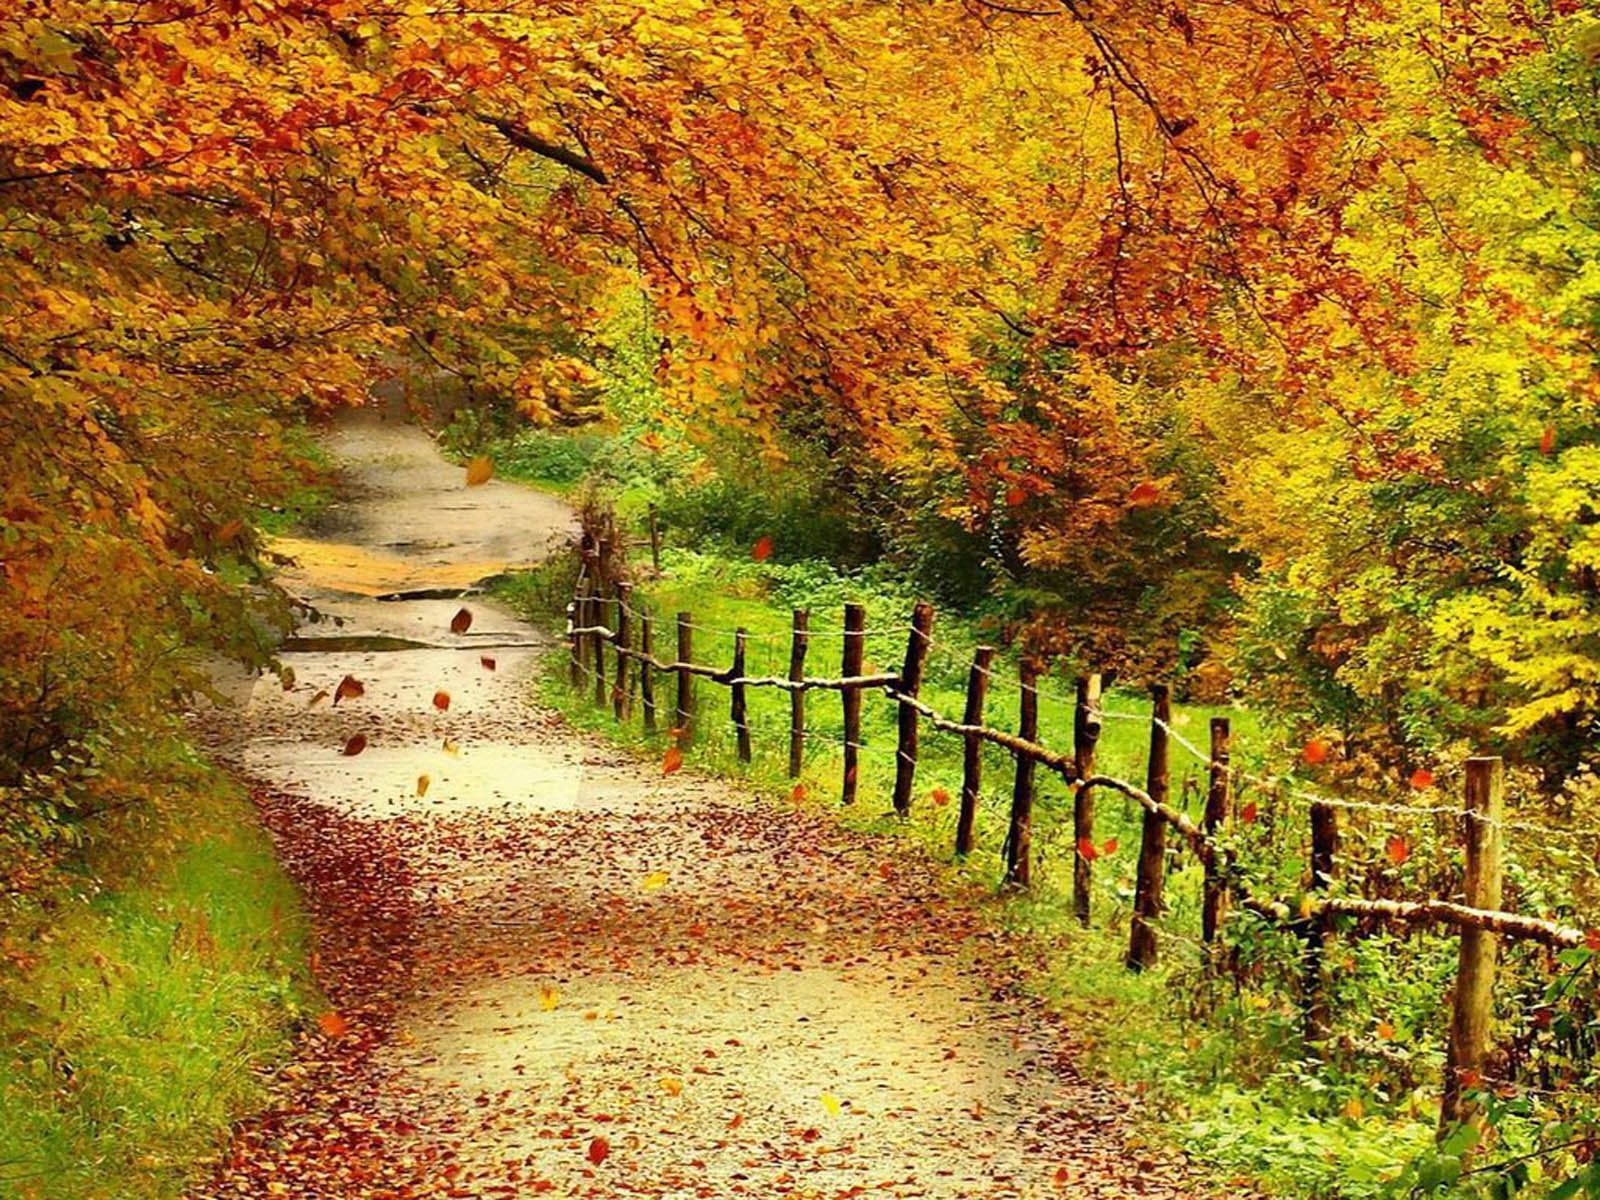 Tag Beautiful Autumn Scenery WallpapersBackgrounds Photos Images 1600x1200